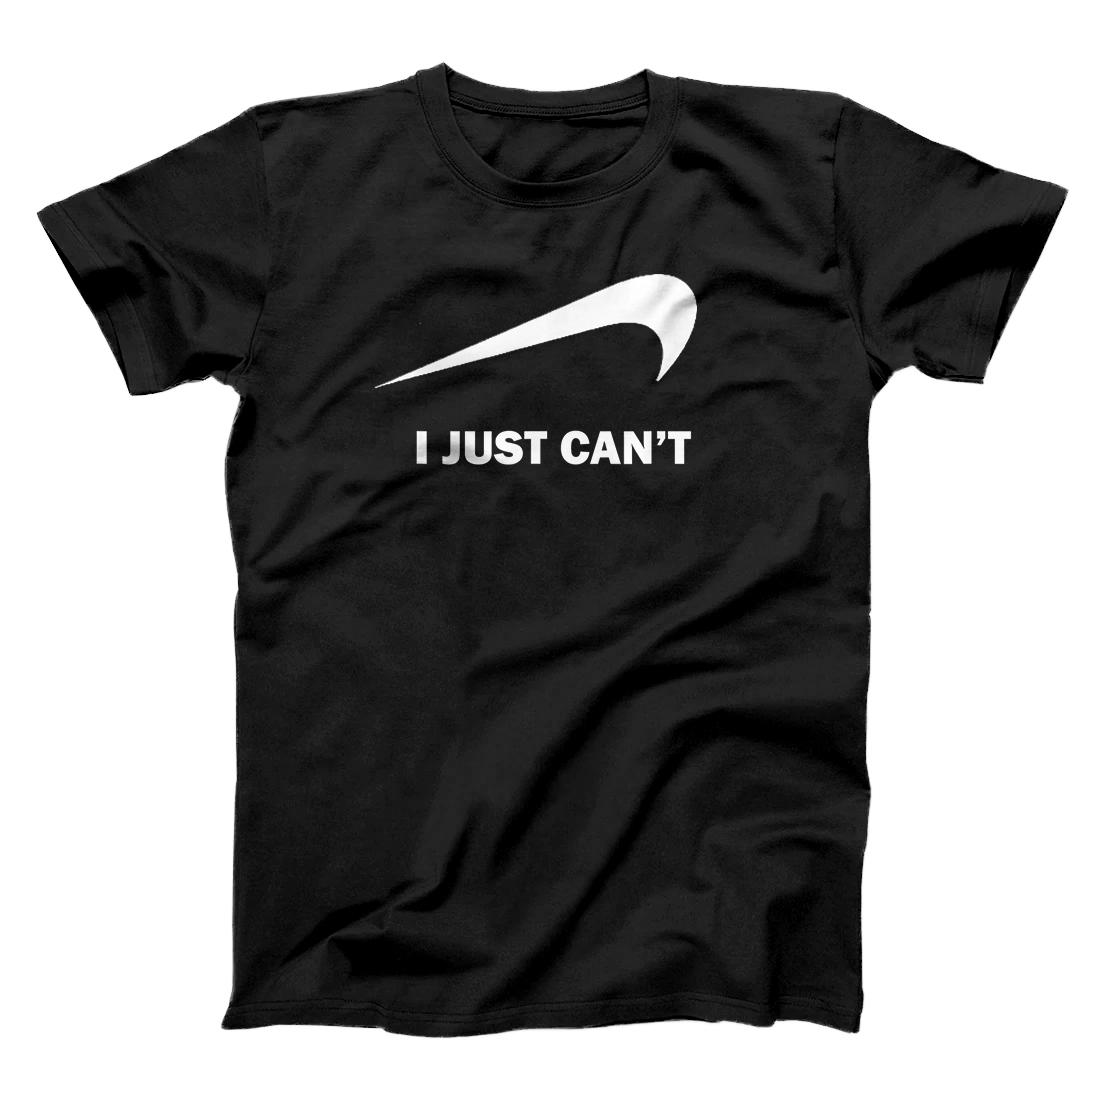 Personalized I JUST CAN'T PARODY MEME SPORTS SHOES SNEAKERS BALL LOGO T-Shirt